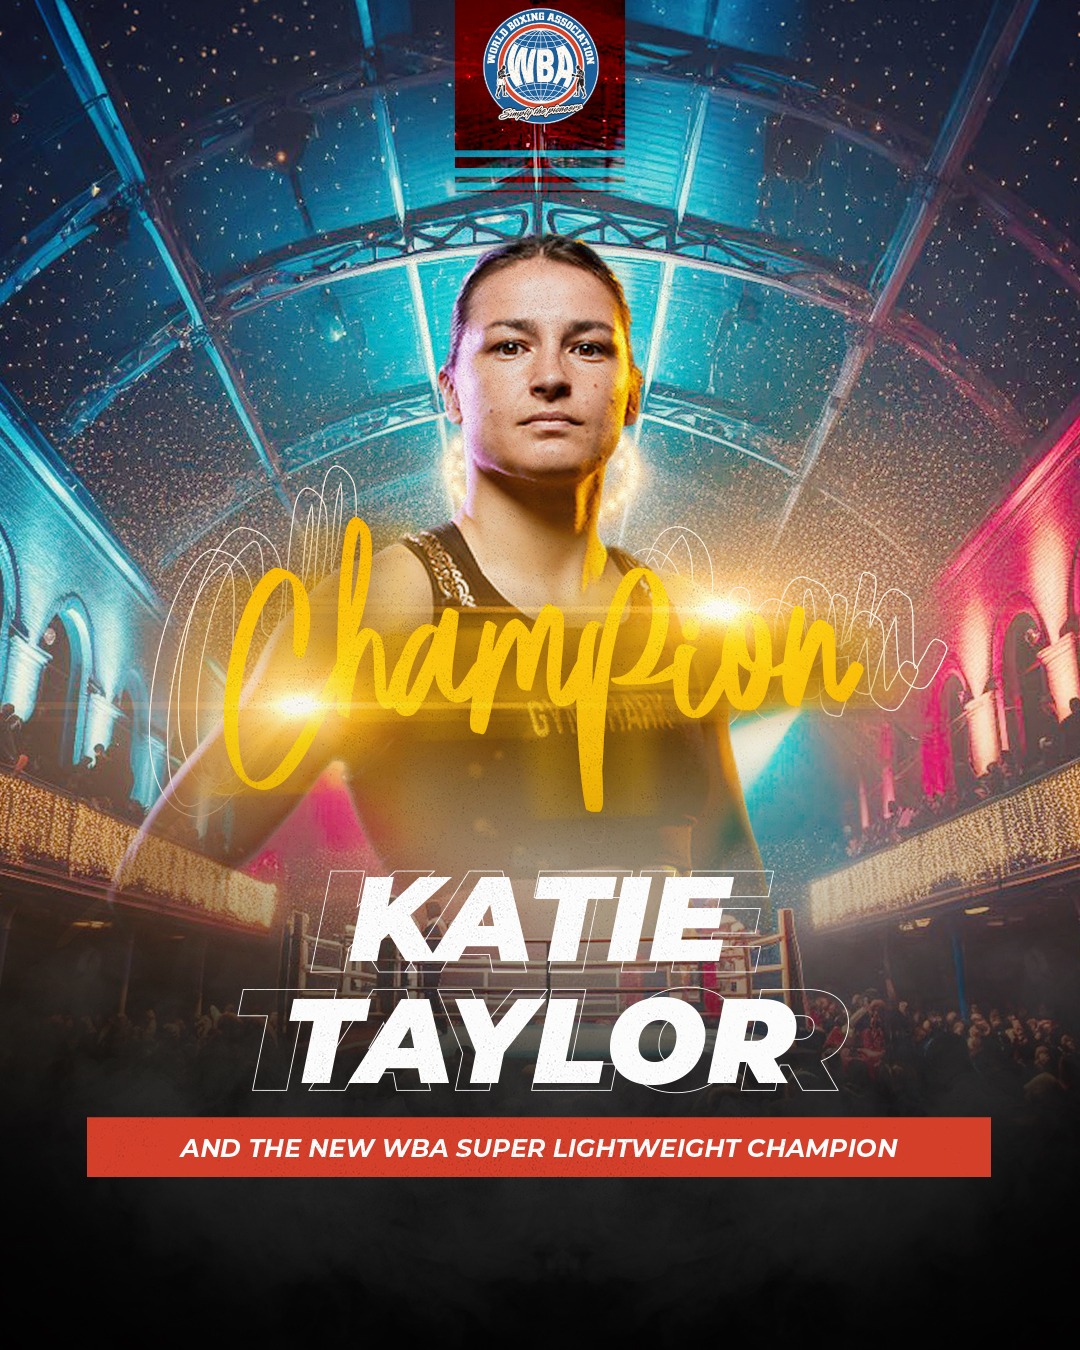 Katie Taylor and Chantelle Cameron become legends 